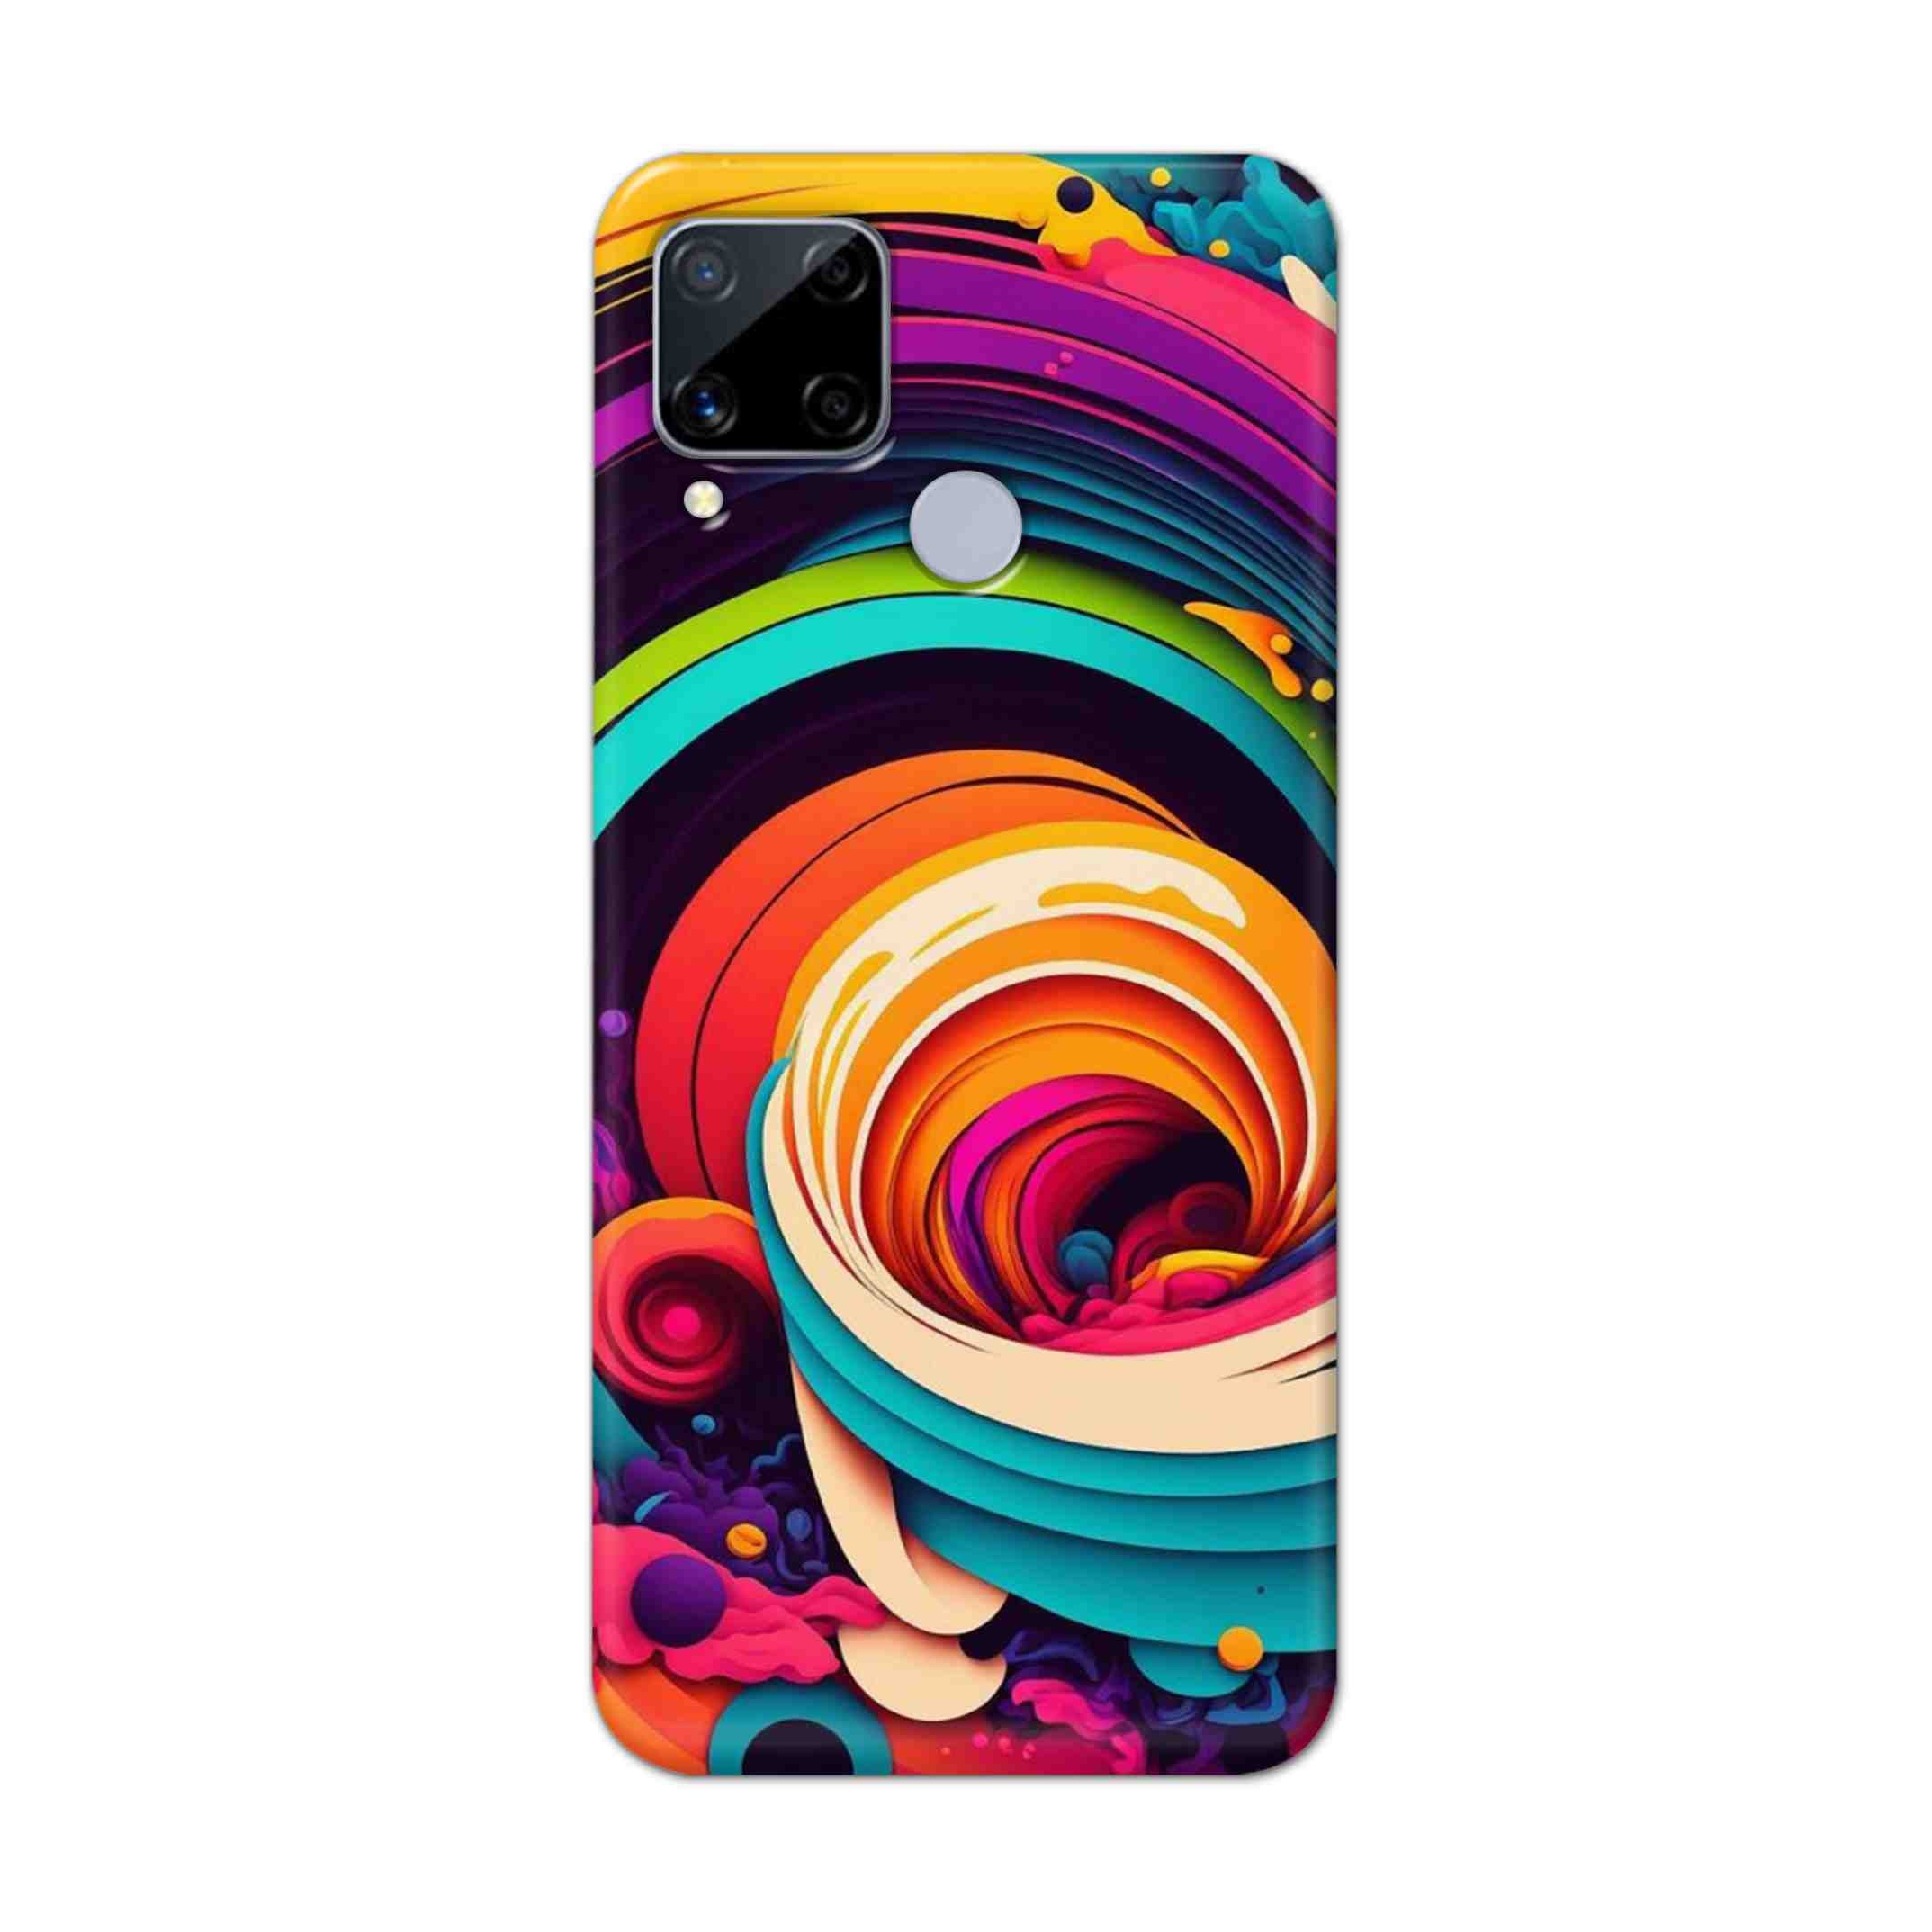 Buy Colour Circle Hard Back Mobile Phone Case Cover For Realme C15 Online